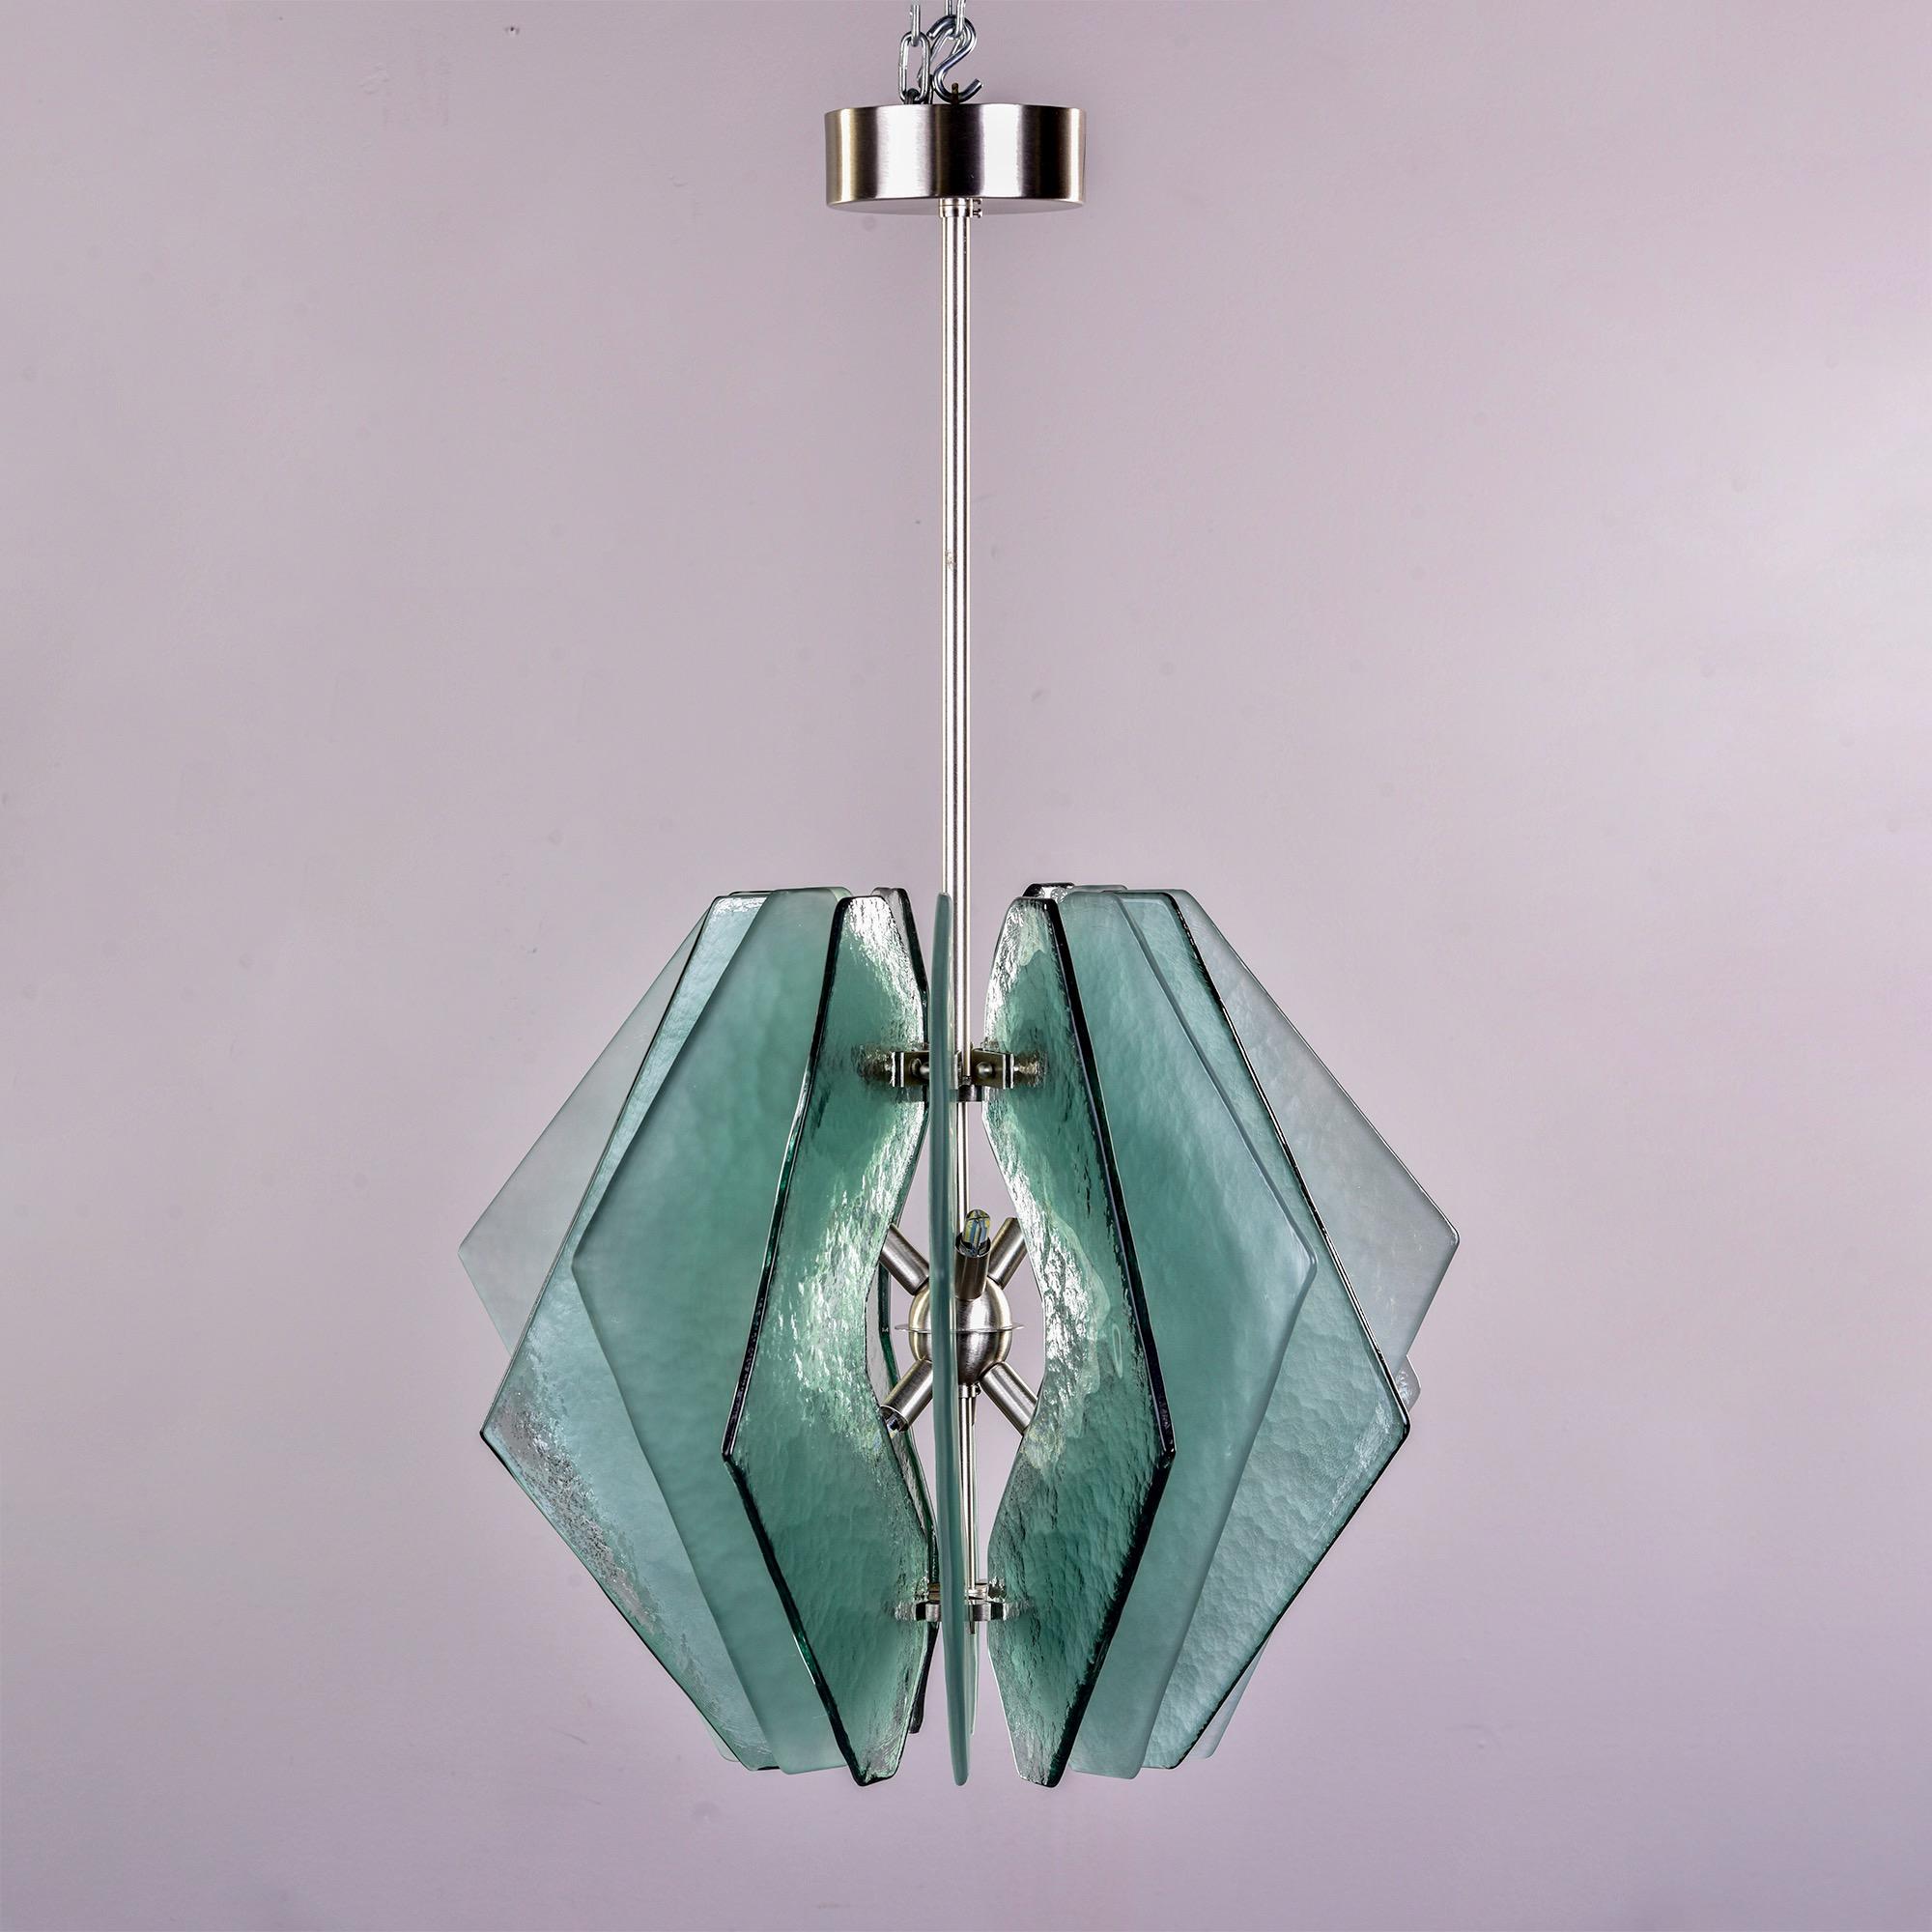 New chandelier made in Italy with Murano glass panels. Polished chrome hardware and canopy, six light fixture with heavy textured bottle green colored glass panels arranged so that the glossy and satin finishes alternate. 

Fixture Only: 19.5”